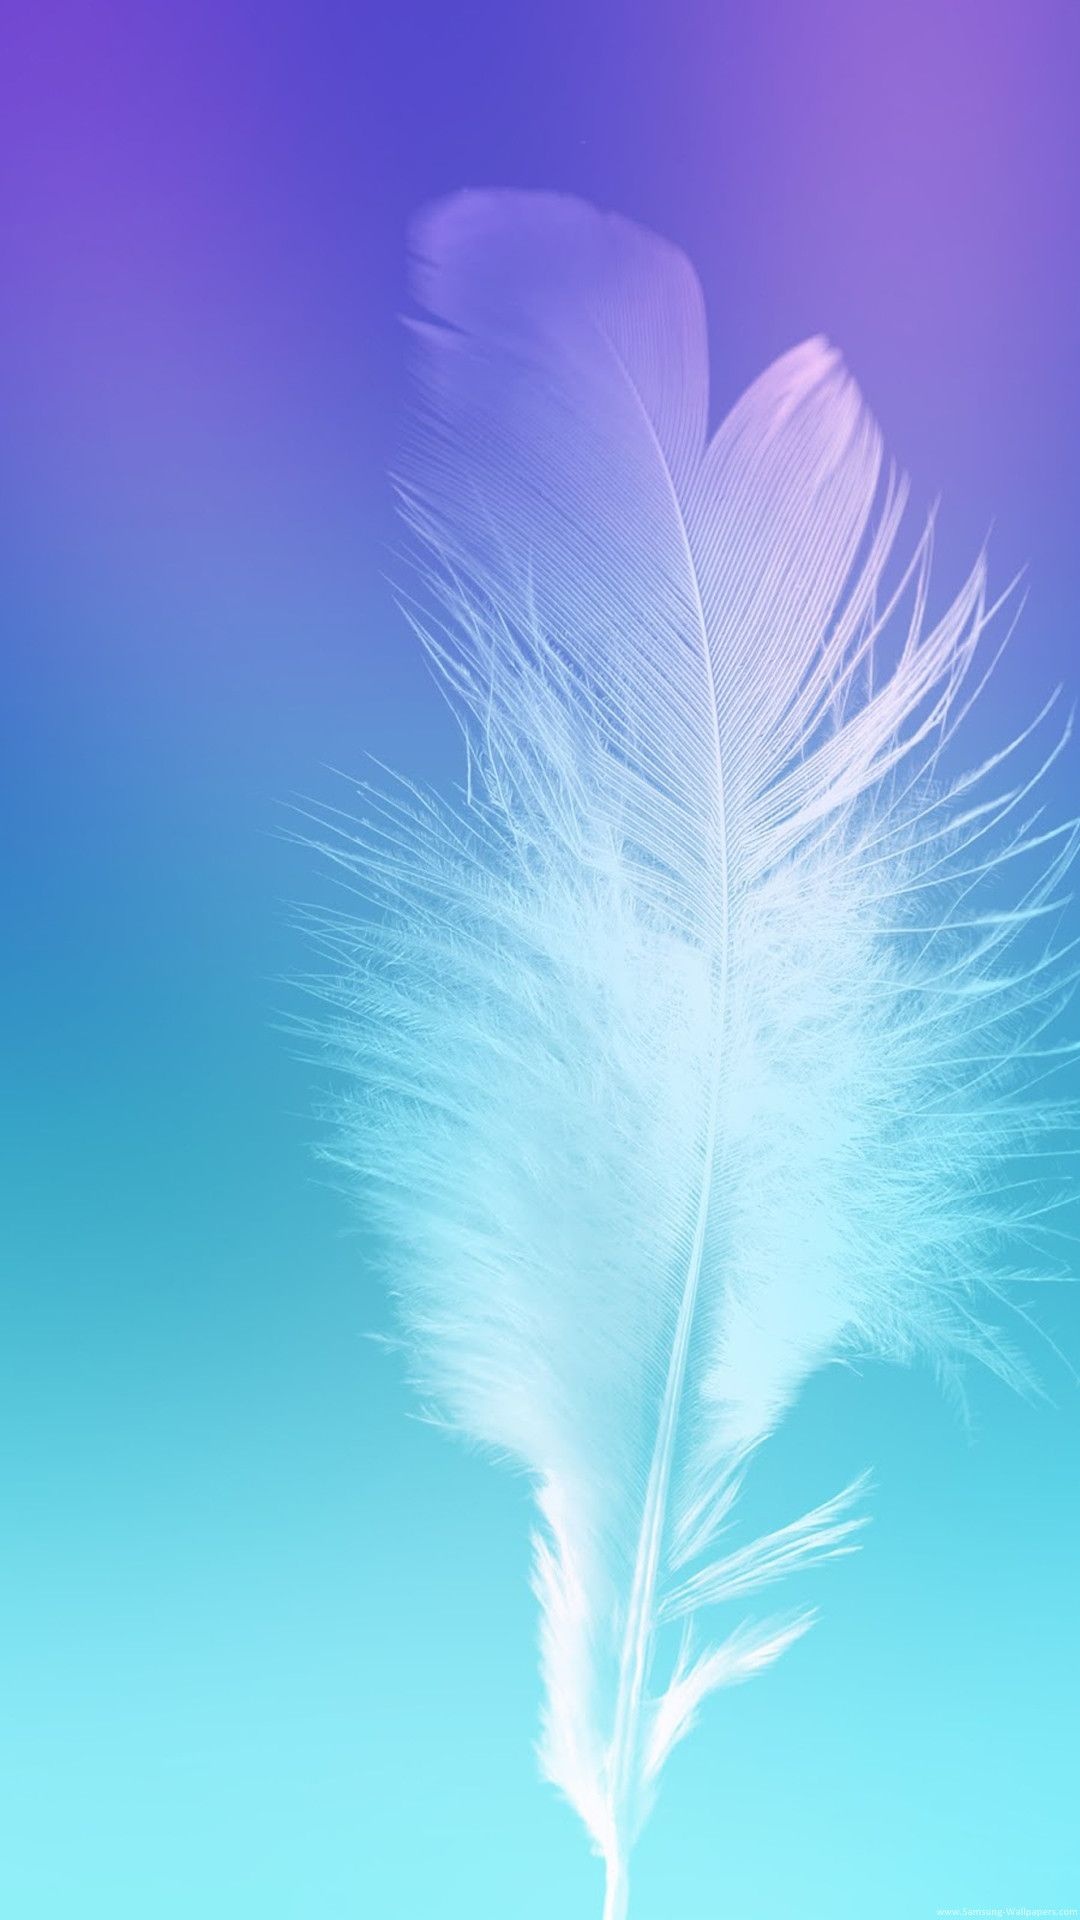 Feather: Semiplume, a cross between the down and contour feathers. 1080x1920 Full HD Wallpaper.